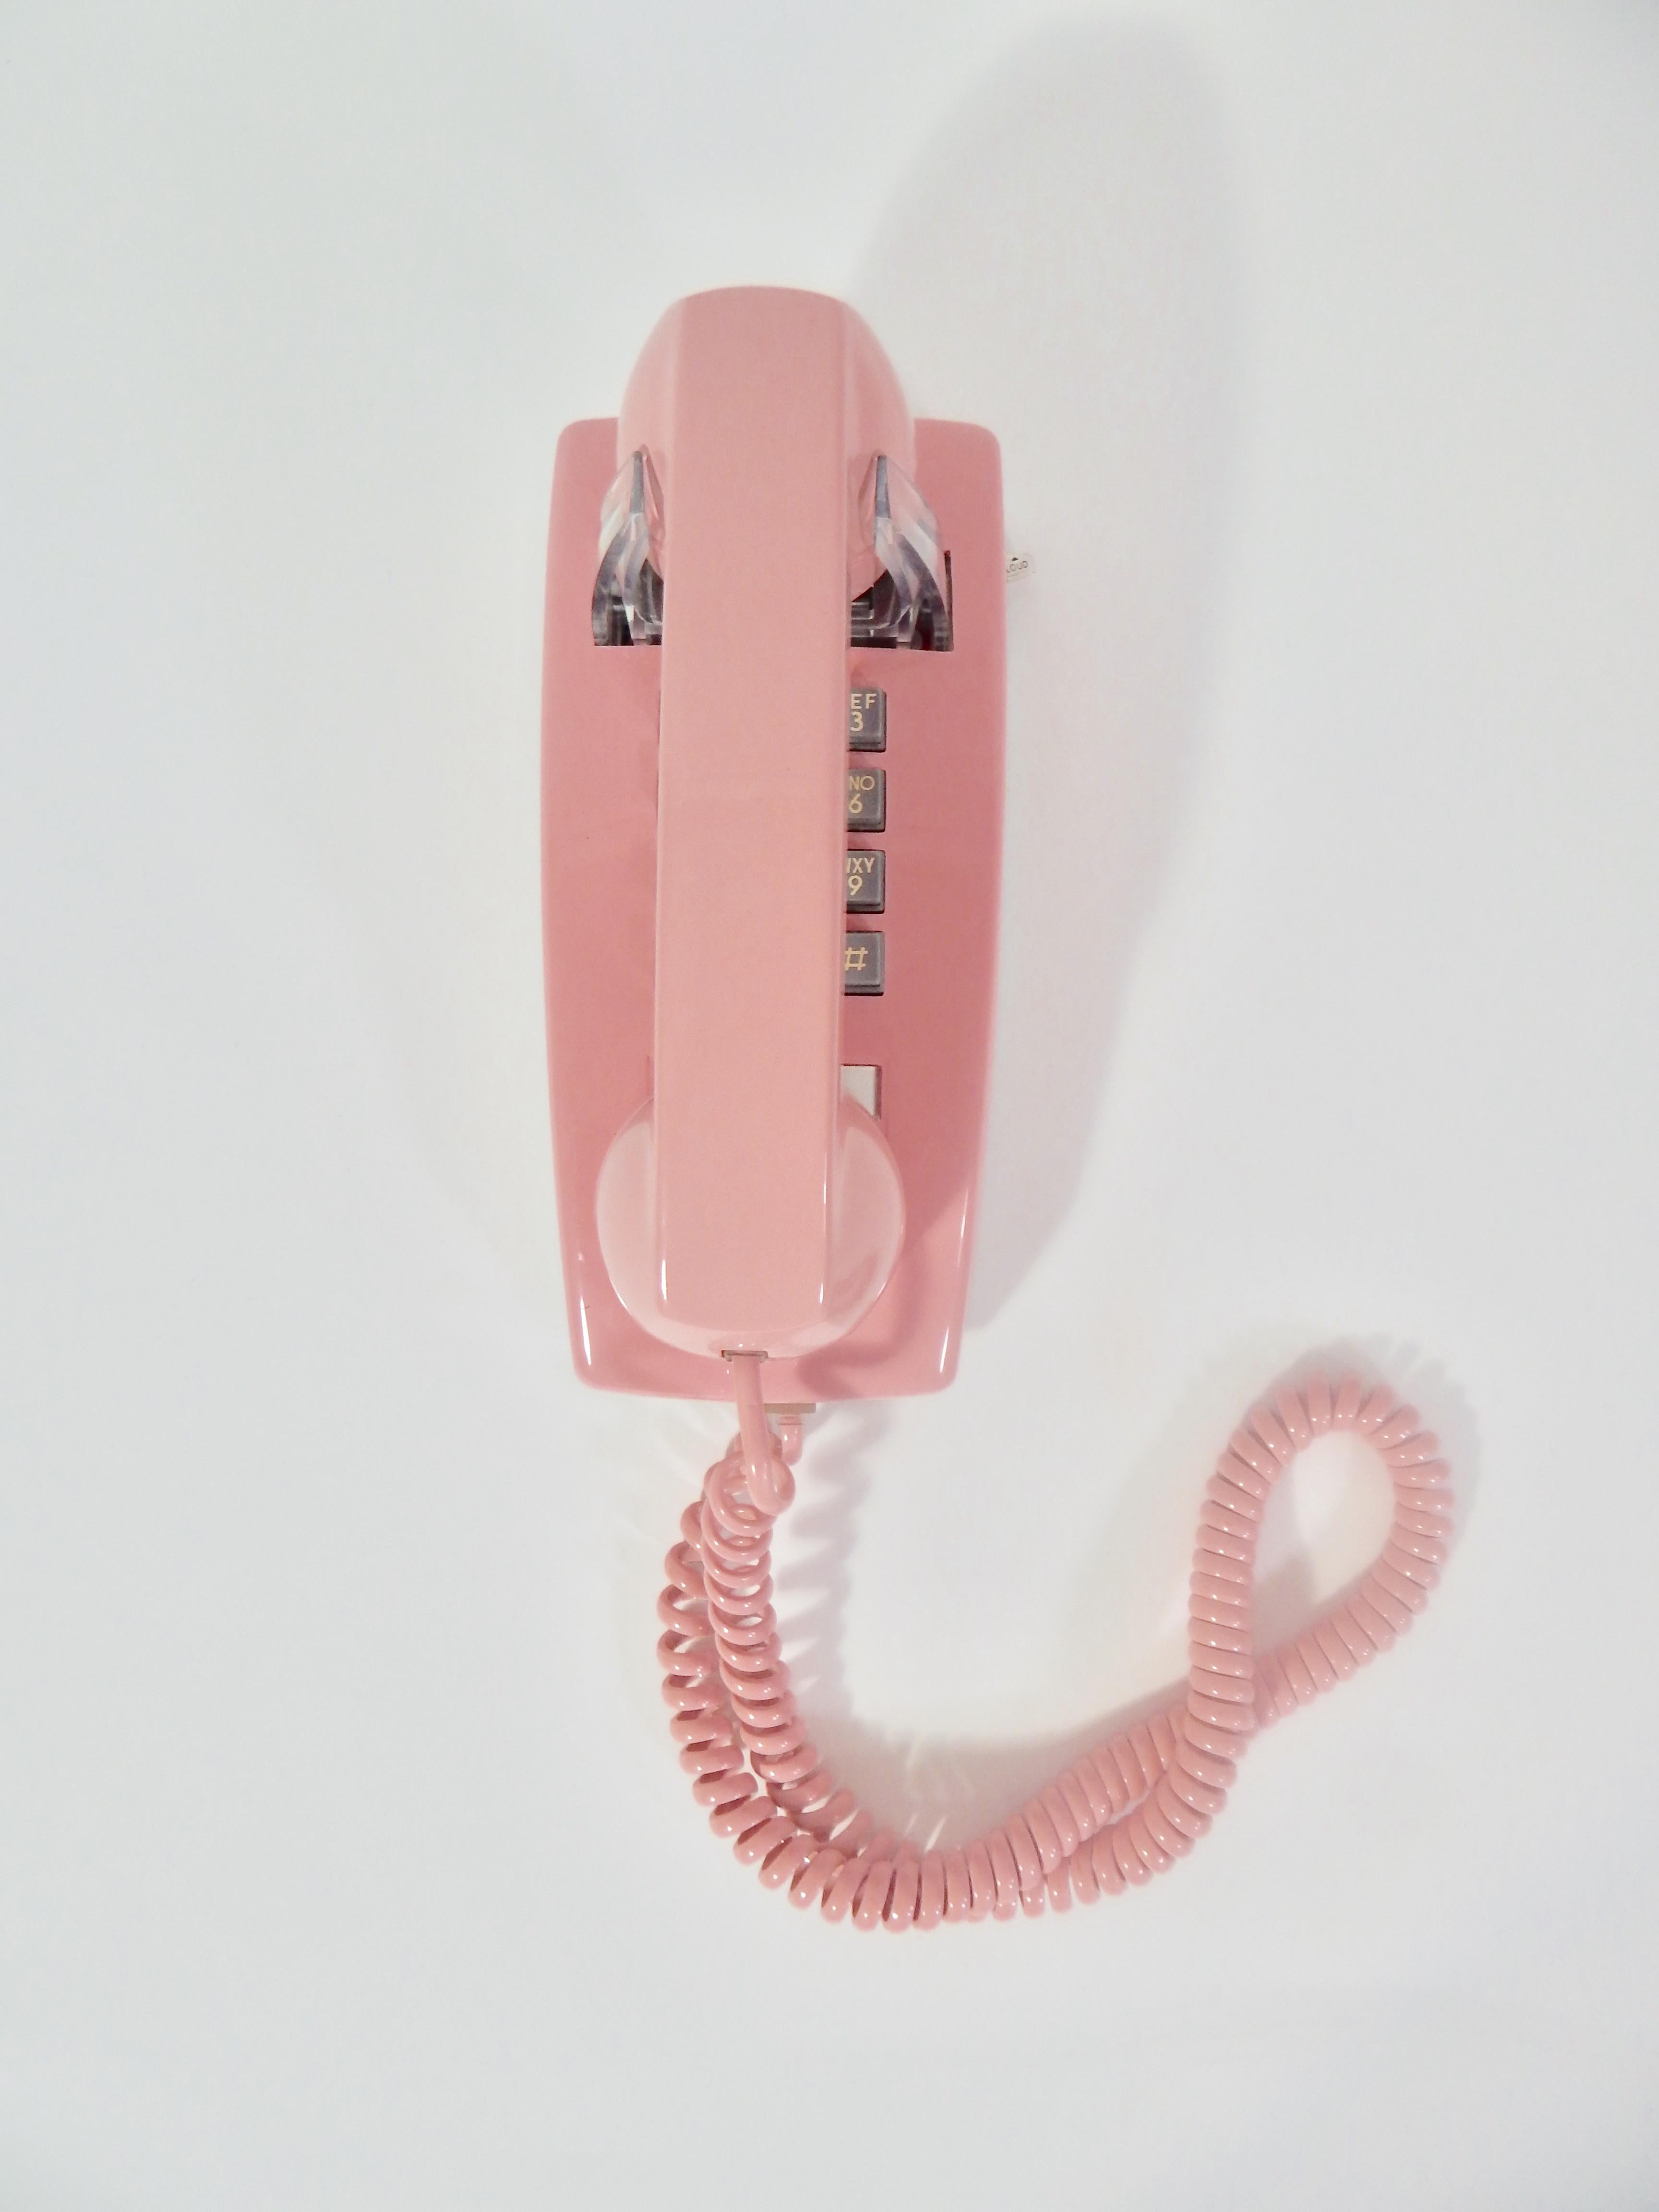 1980s pink telephone for wall. Fun piece! Excellent condition. Possibly never used.
We offer complimentary free domestic shipping for this item.

 